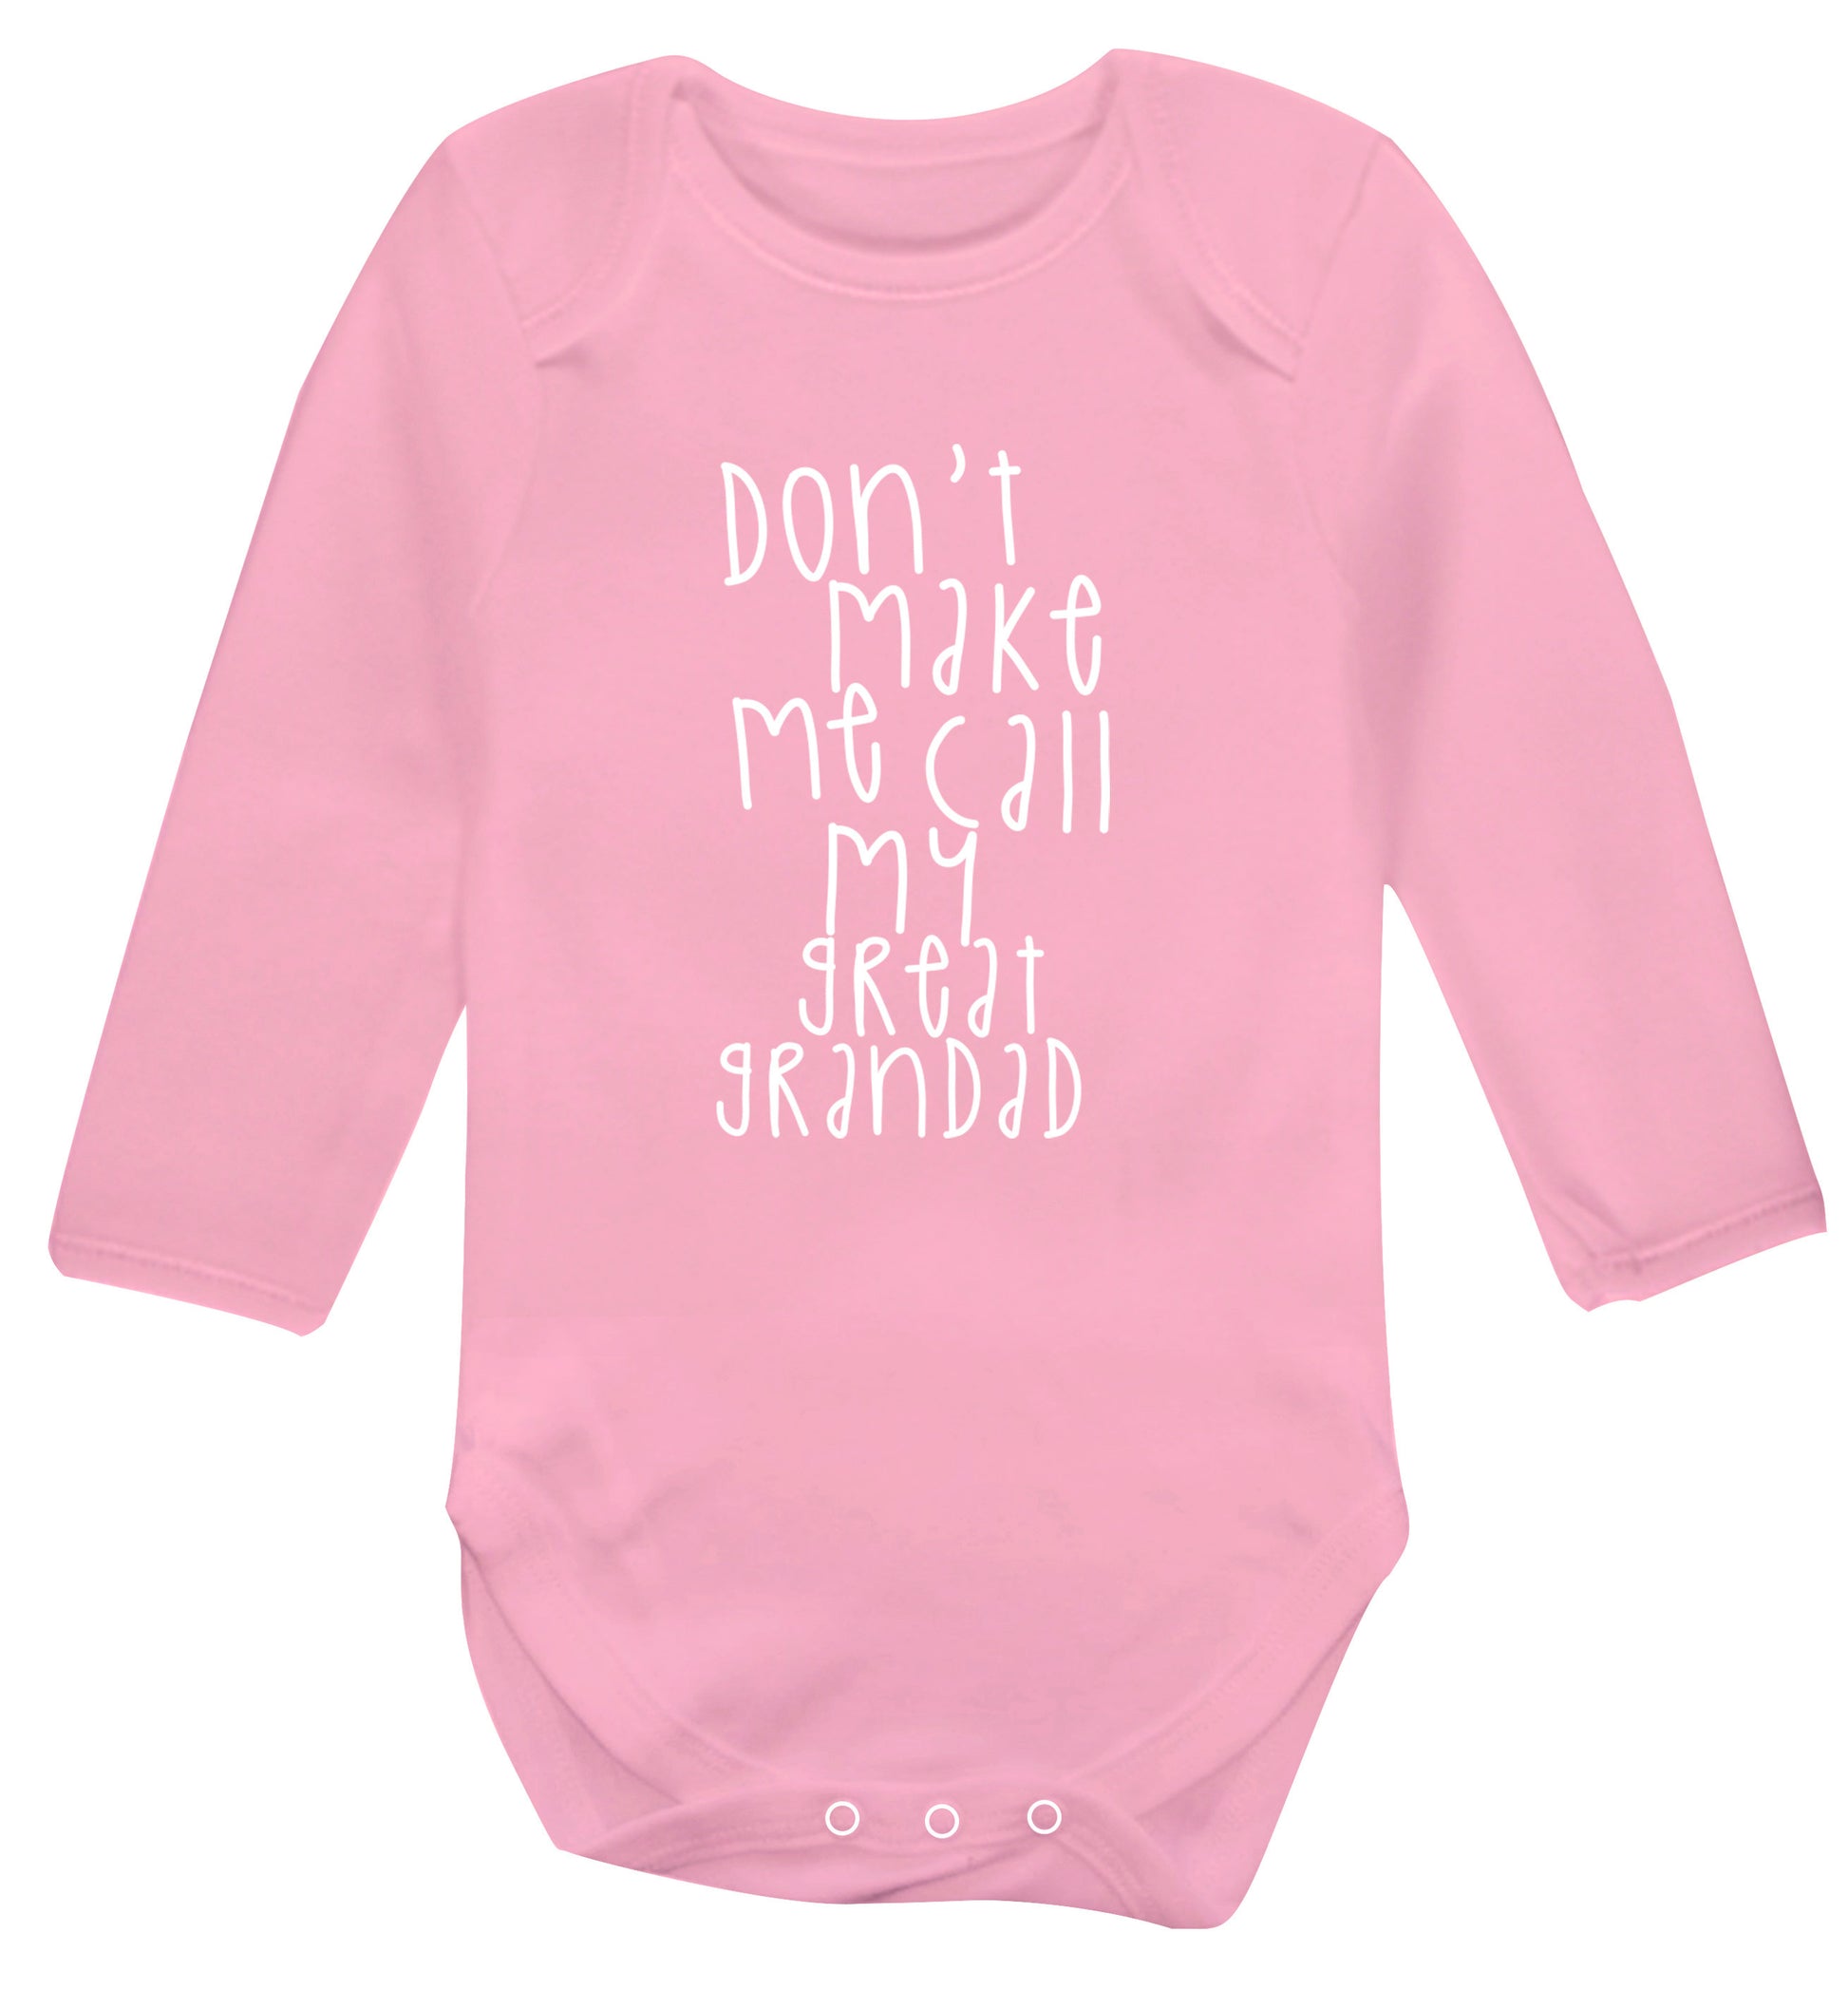 Don't make me call my great grandad Baby Vest long sleeved pale pink 6-12 months